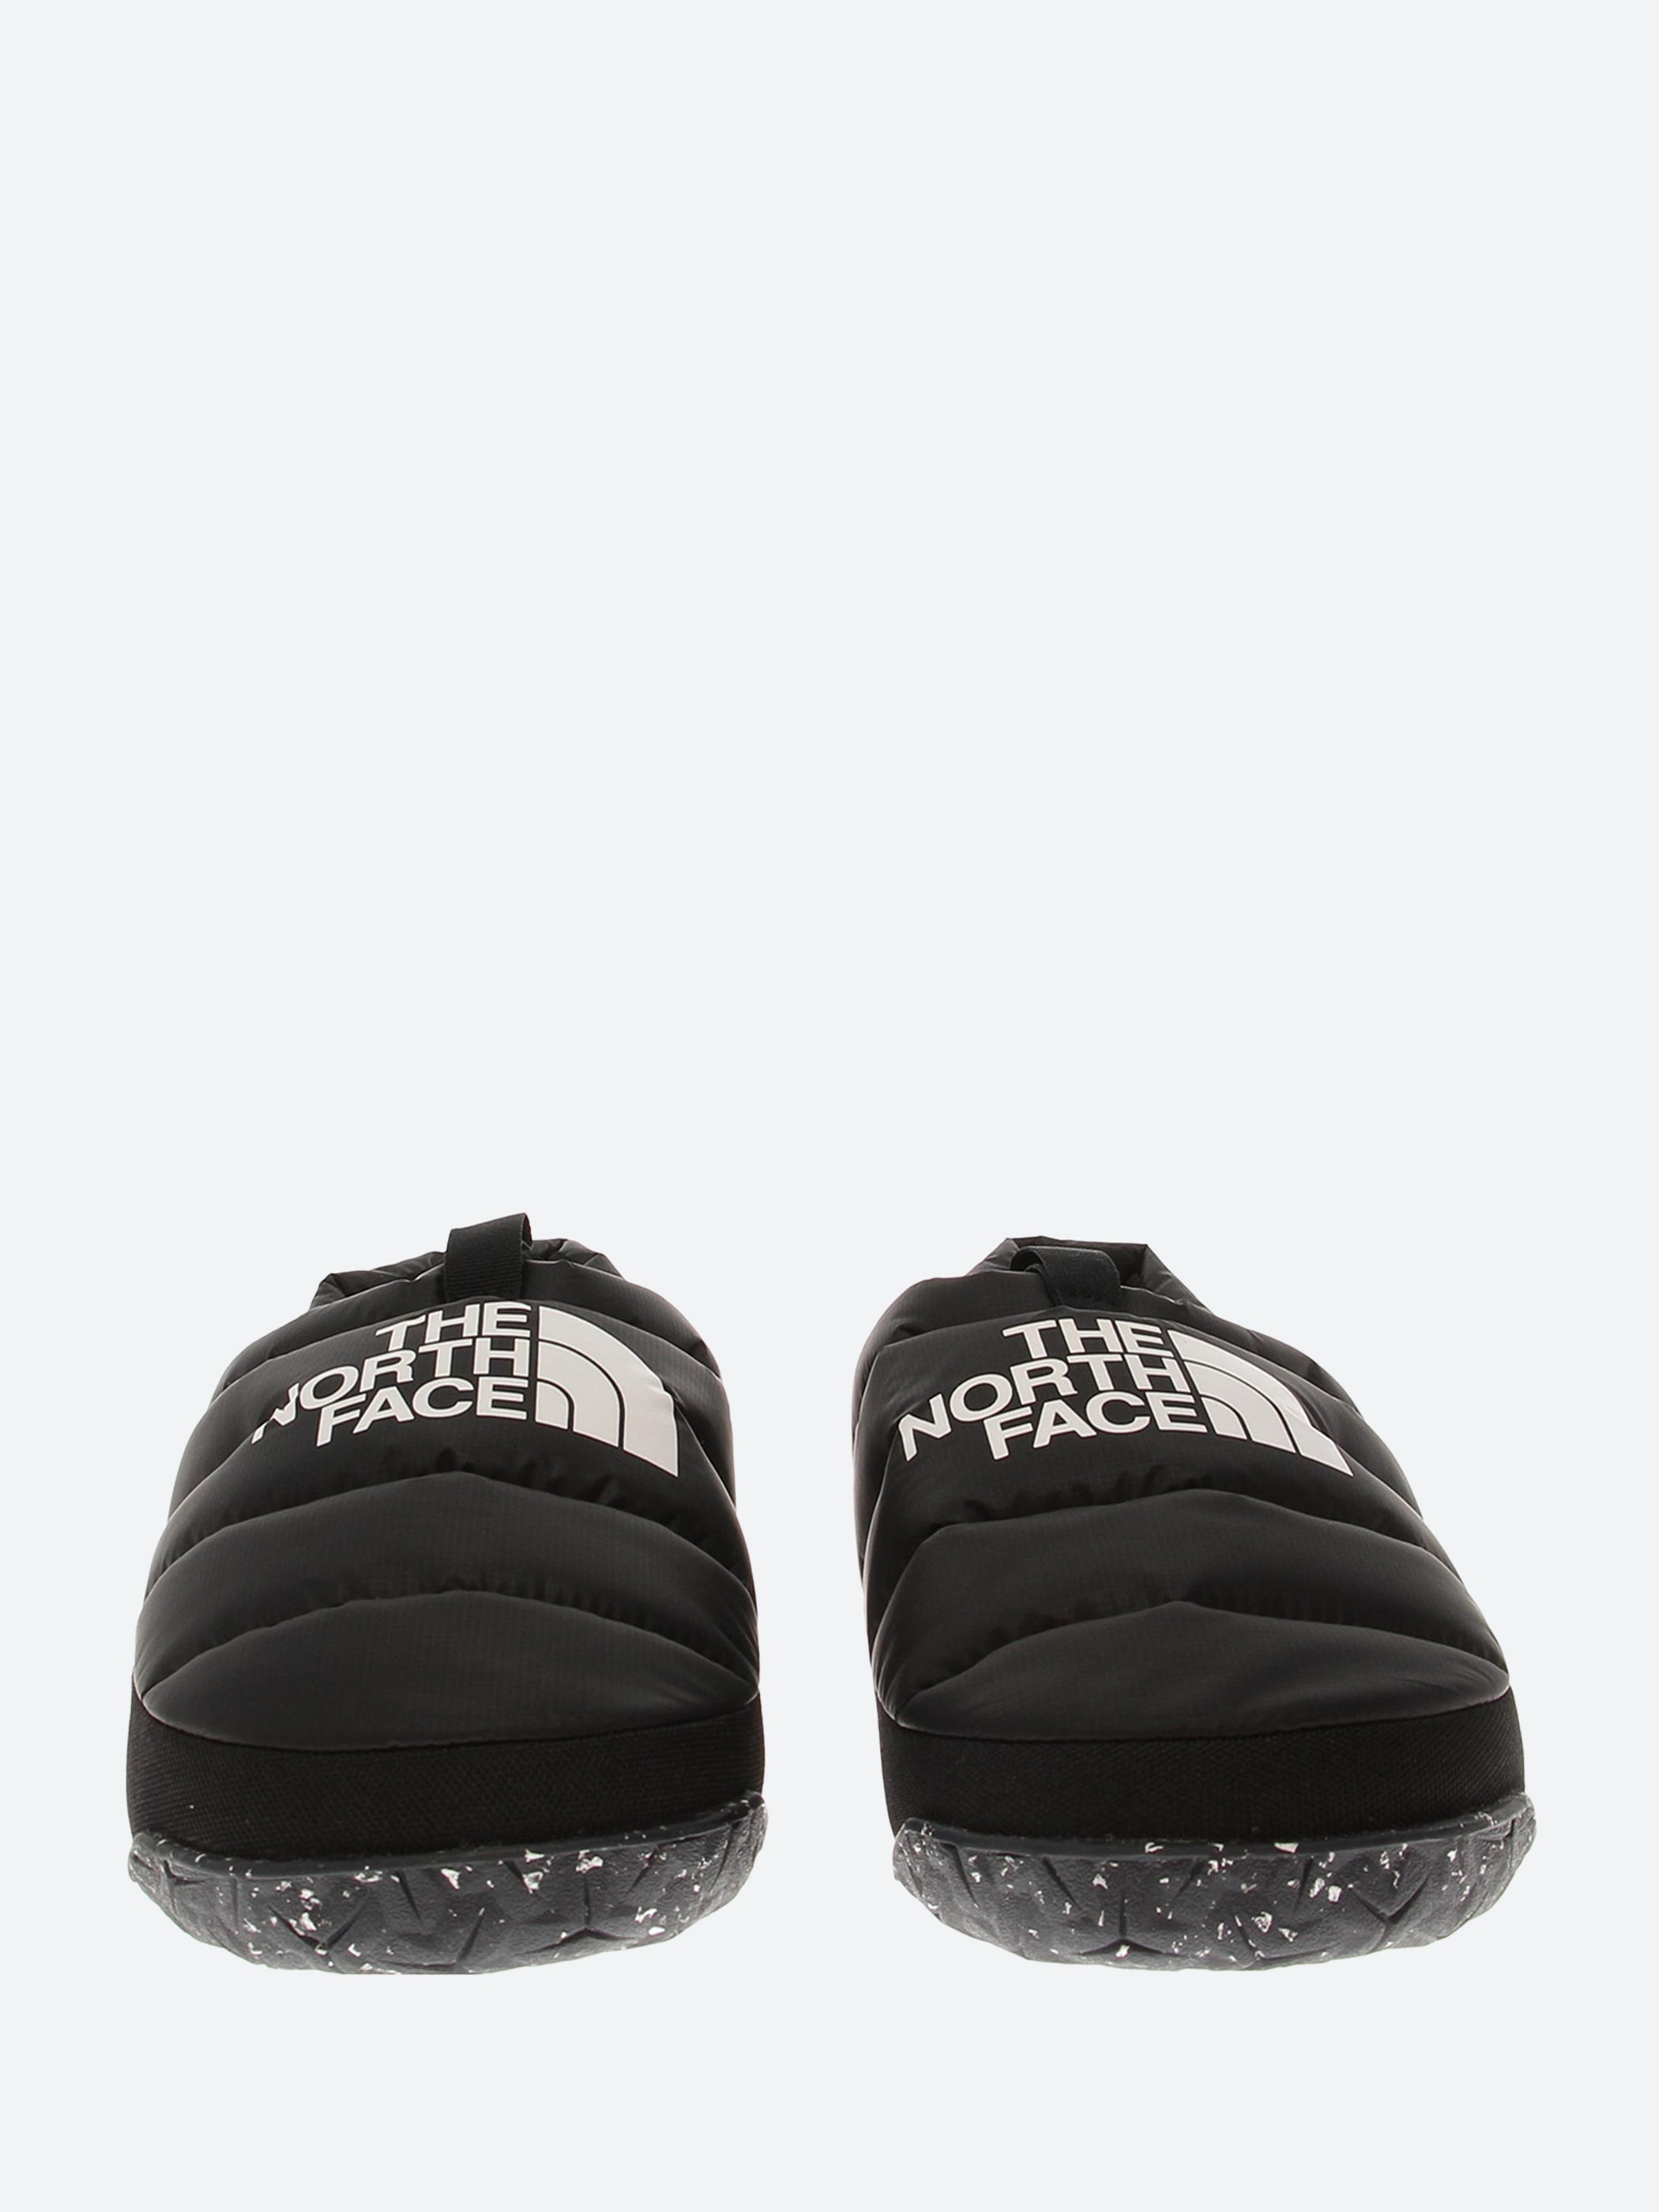 The North Face - M Nuptse Mule in Black and White – gravitypope